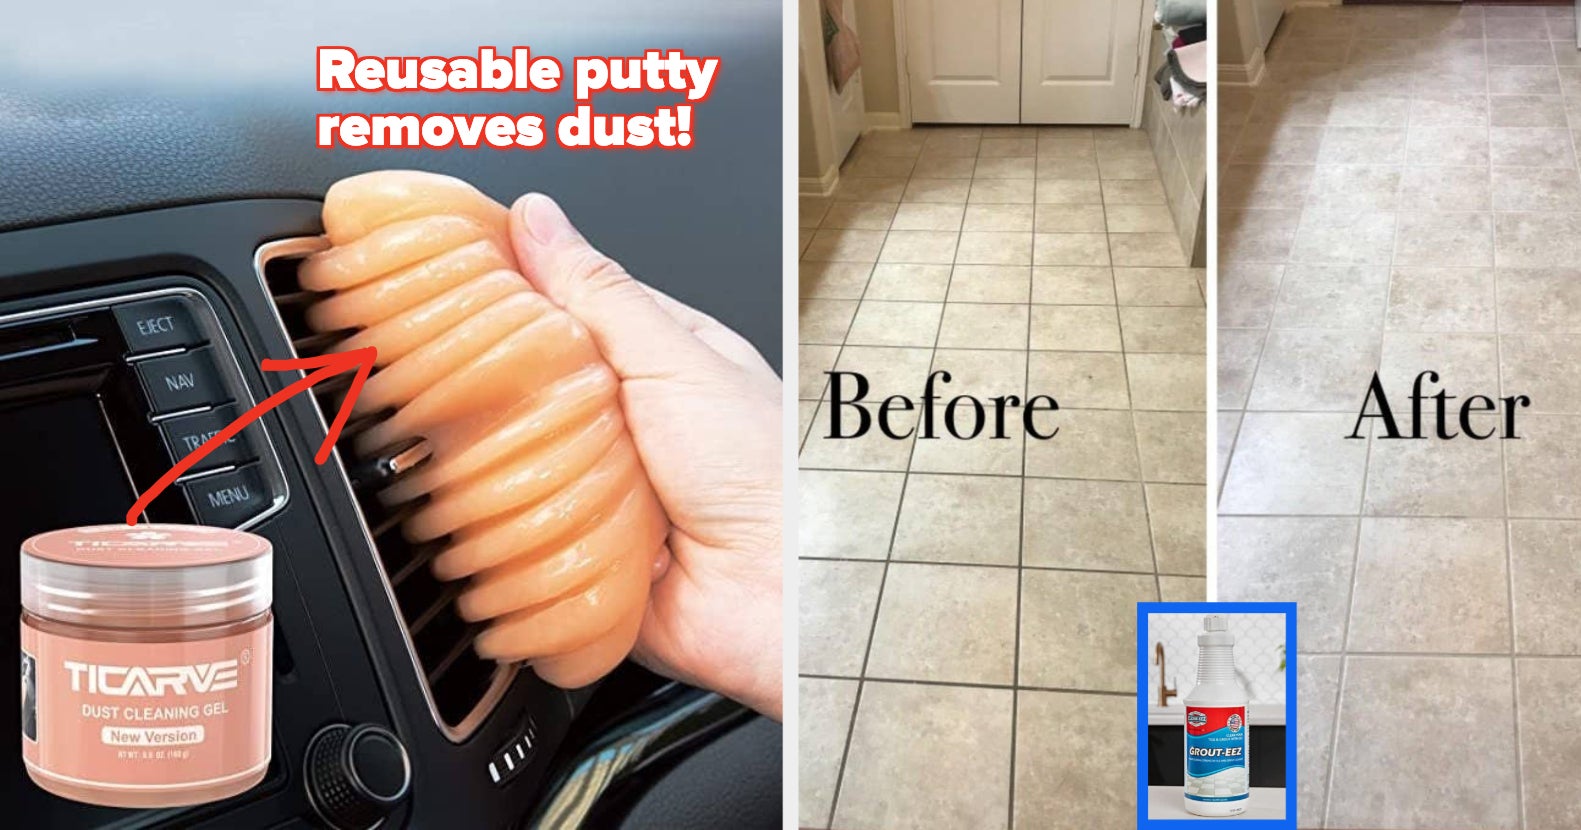 11 TikTok Cleaning Products That Are Grossly SatisfyingHelloGiggles